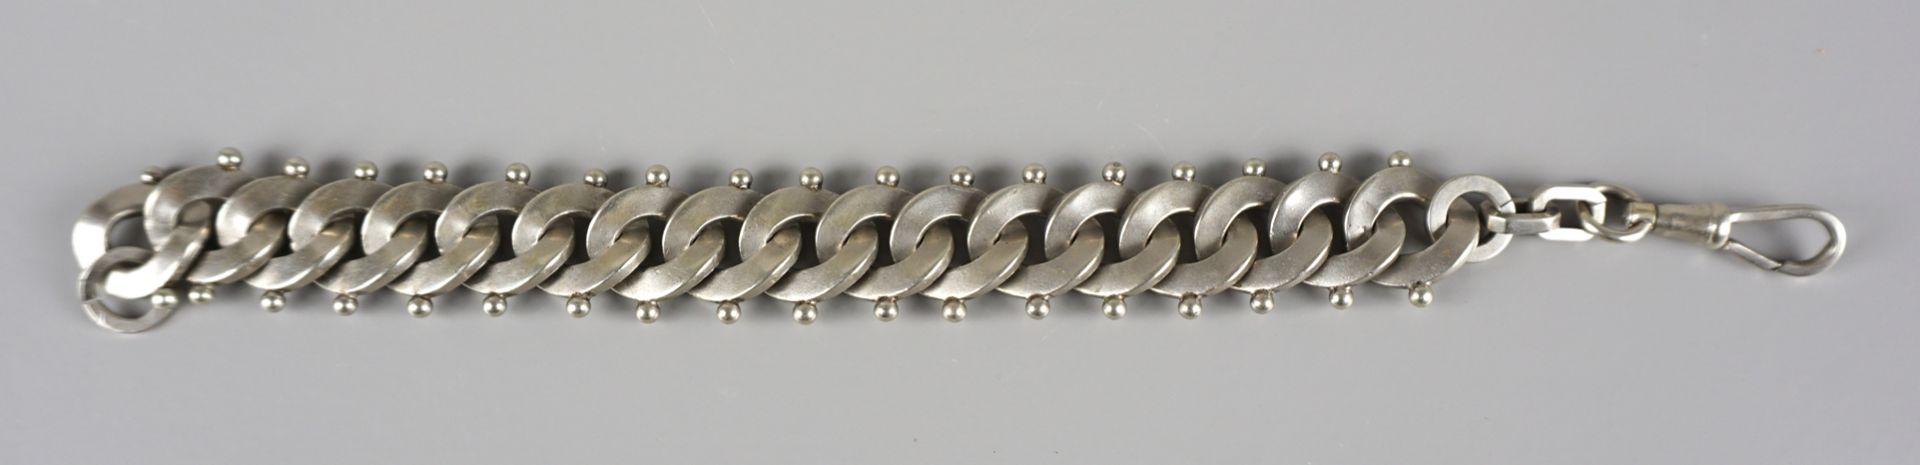 Art Deco watch chain, nickel plated, France, 1920s/1930s